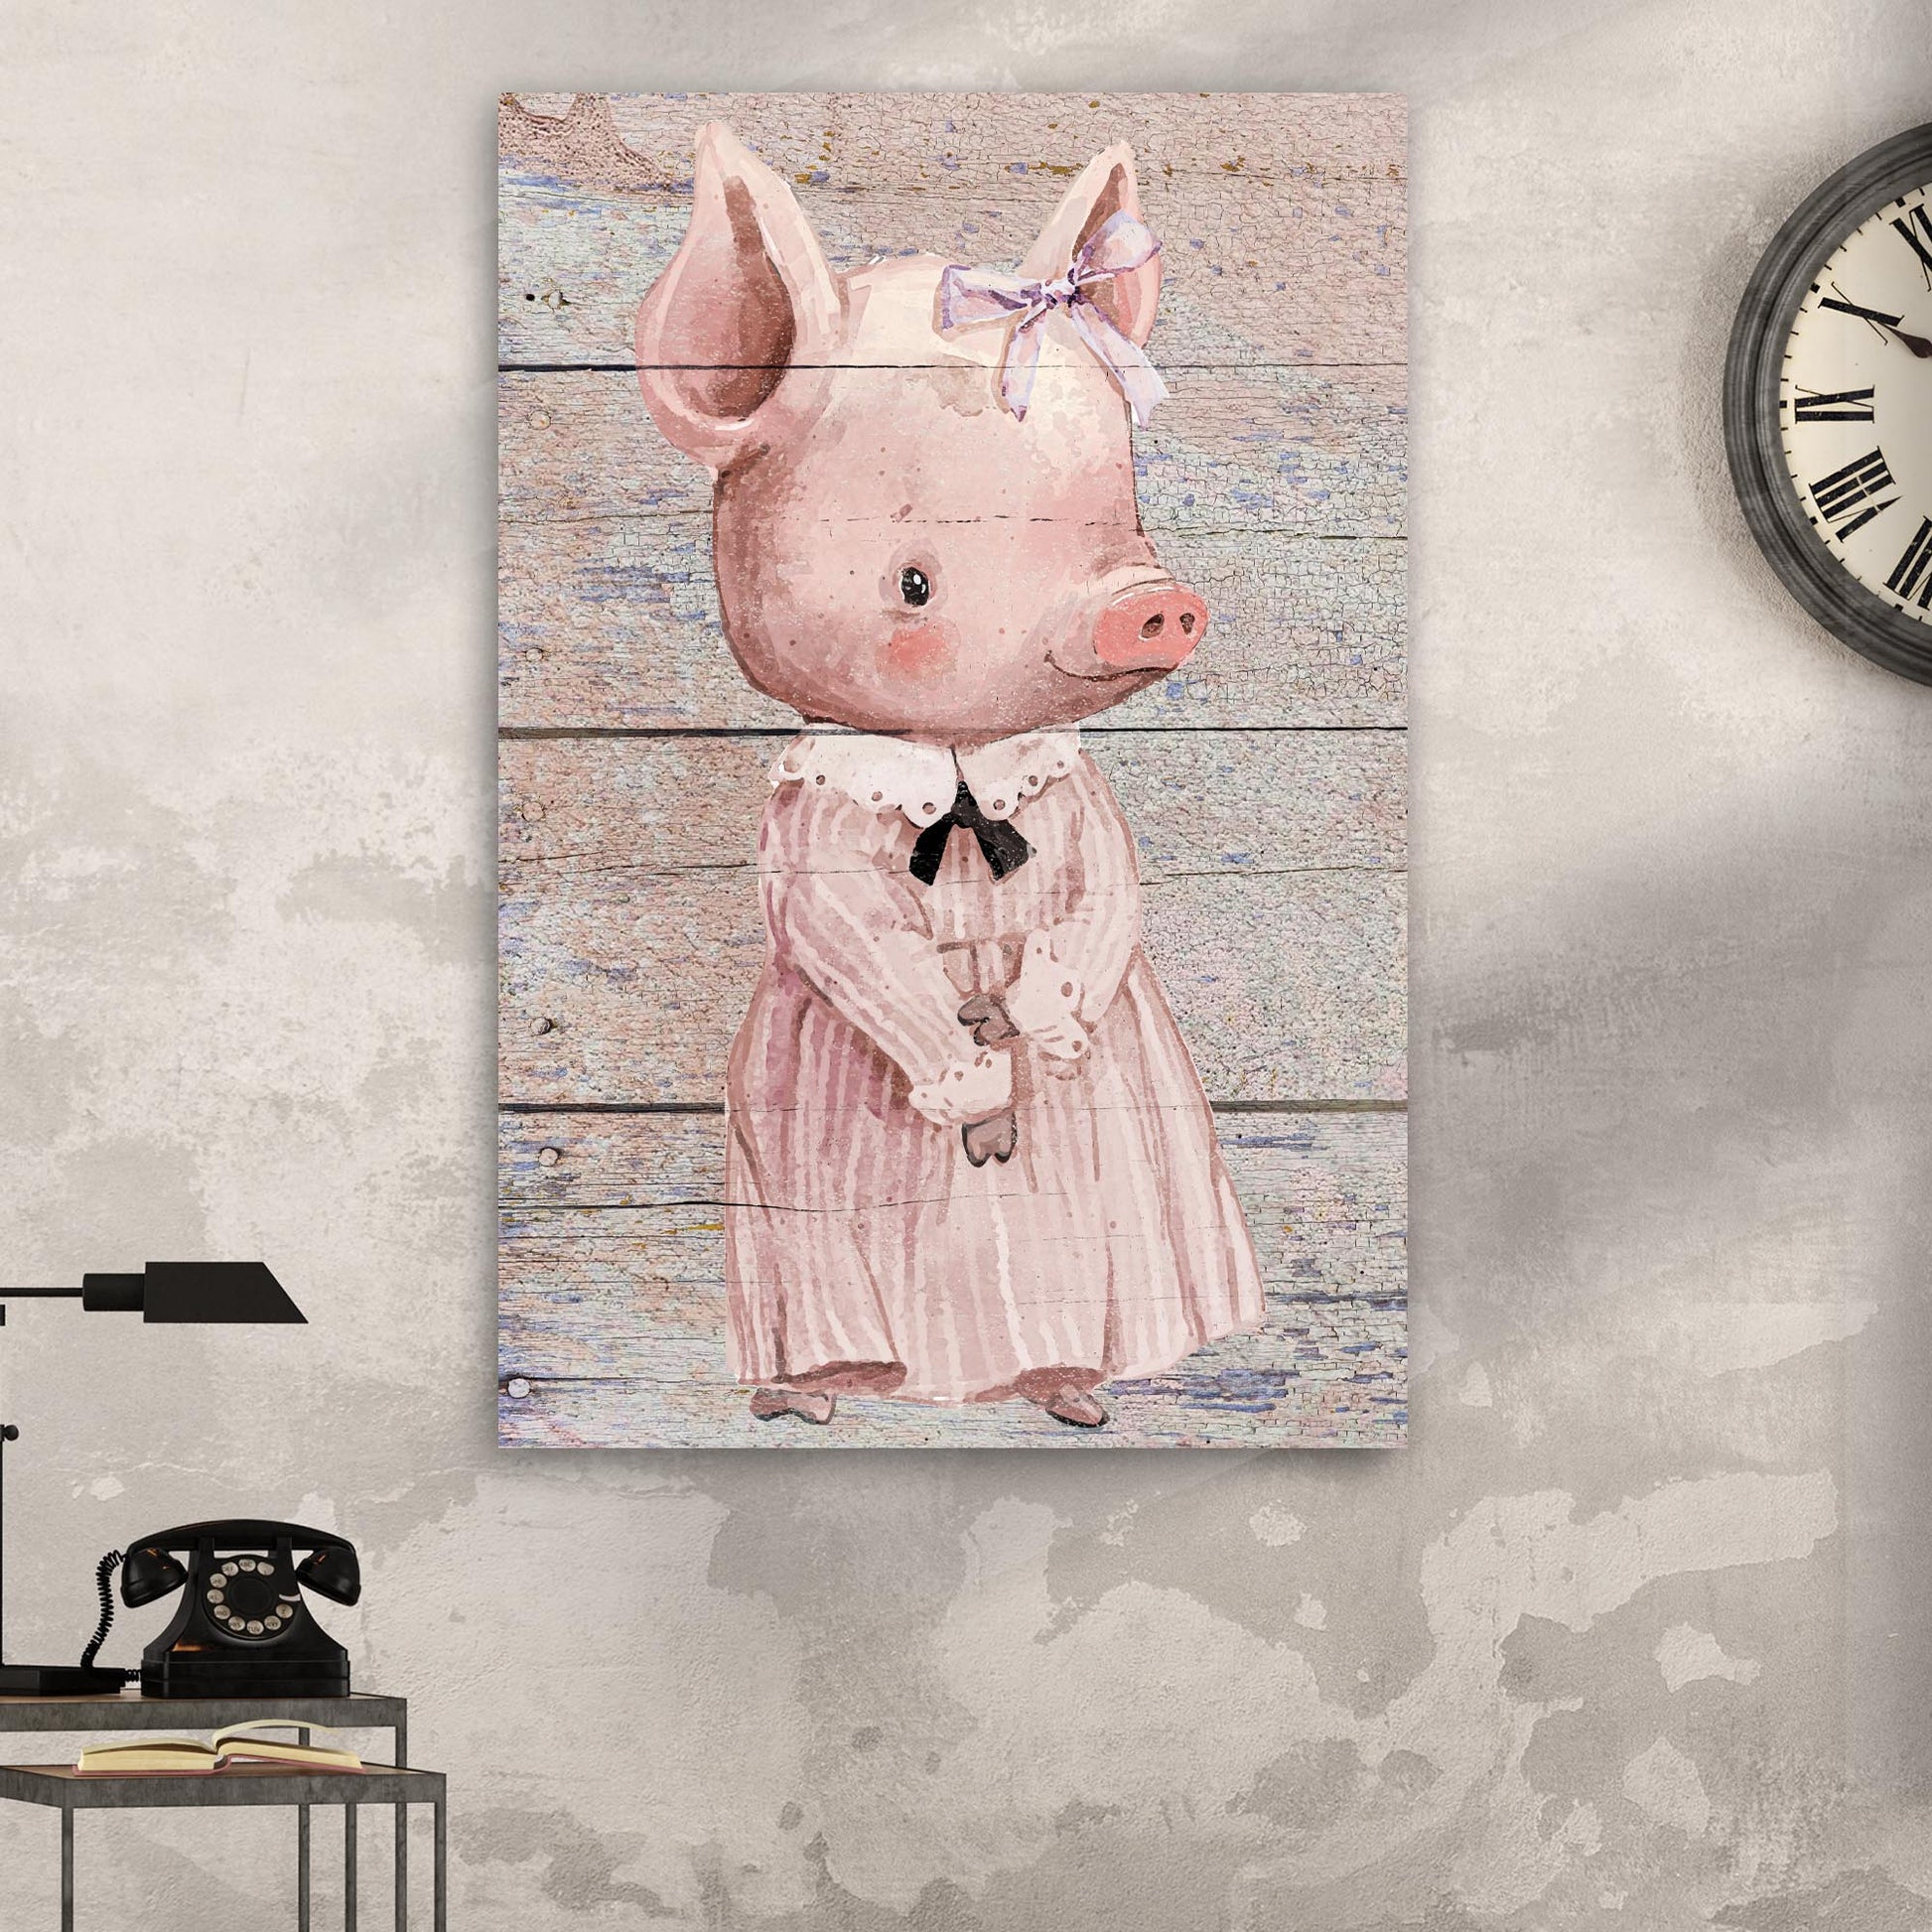 Simple Ribbon Dress Pig Canvas Wall Art Style 2 - Image by Tailored Canvases